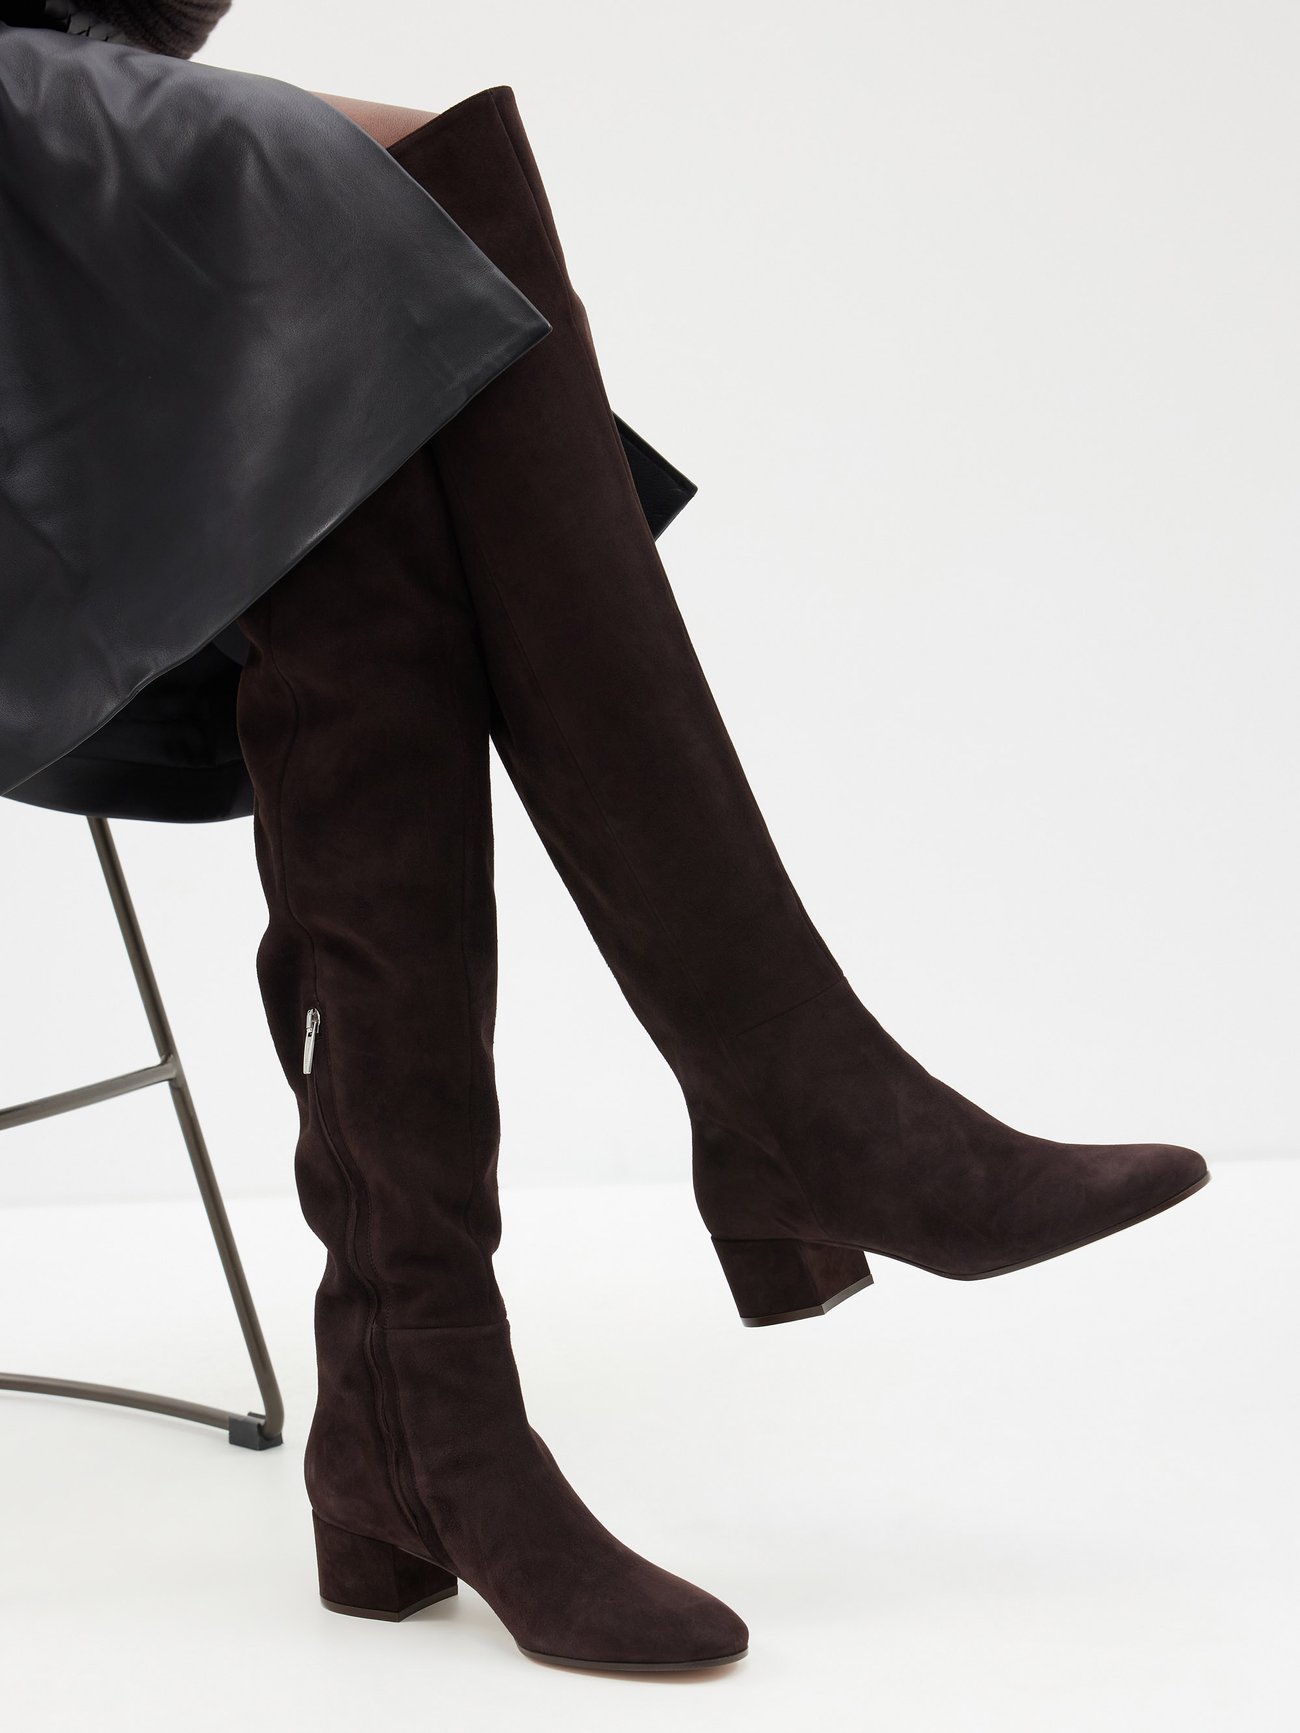 Brown Rolling 45 suede knee-high boots | Gianvito Rossi